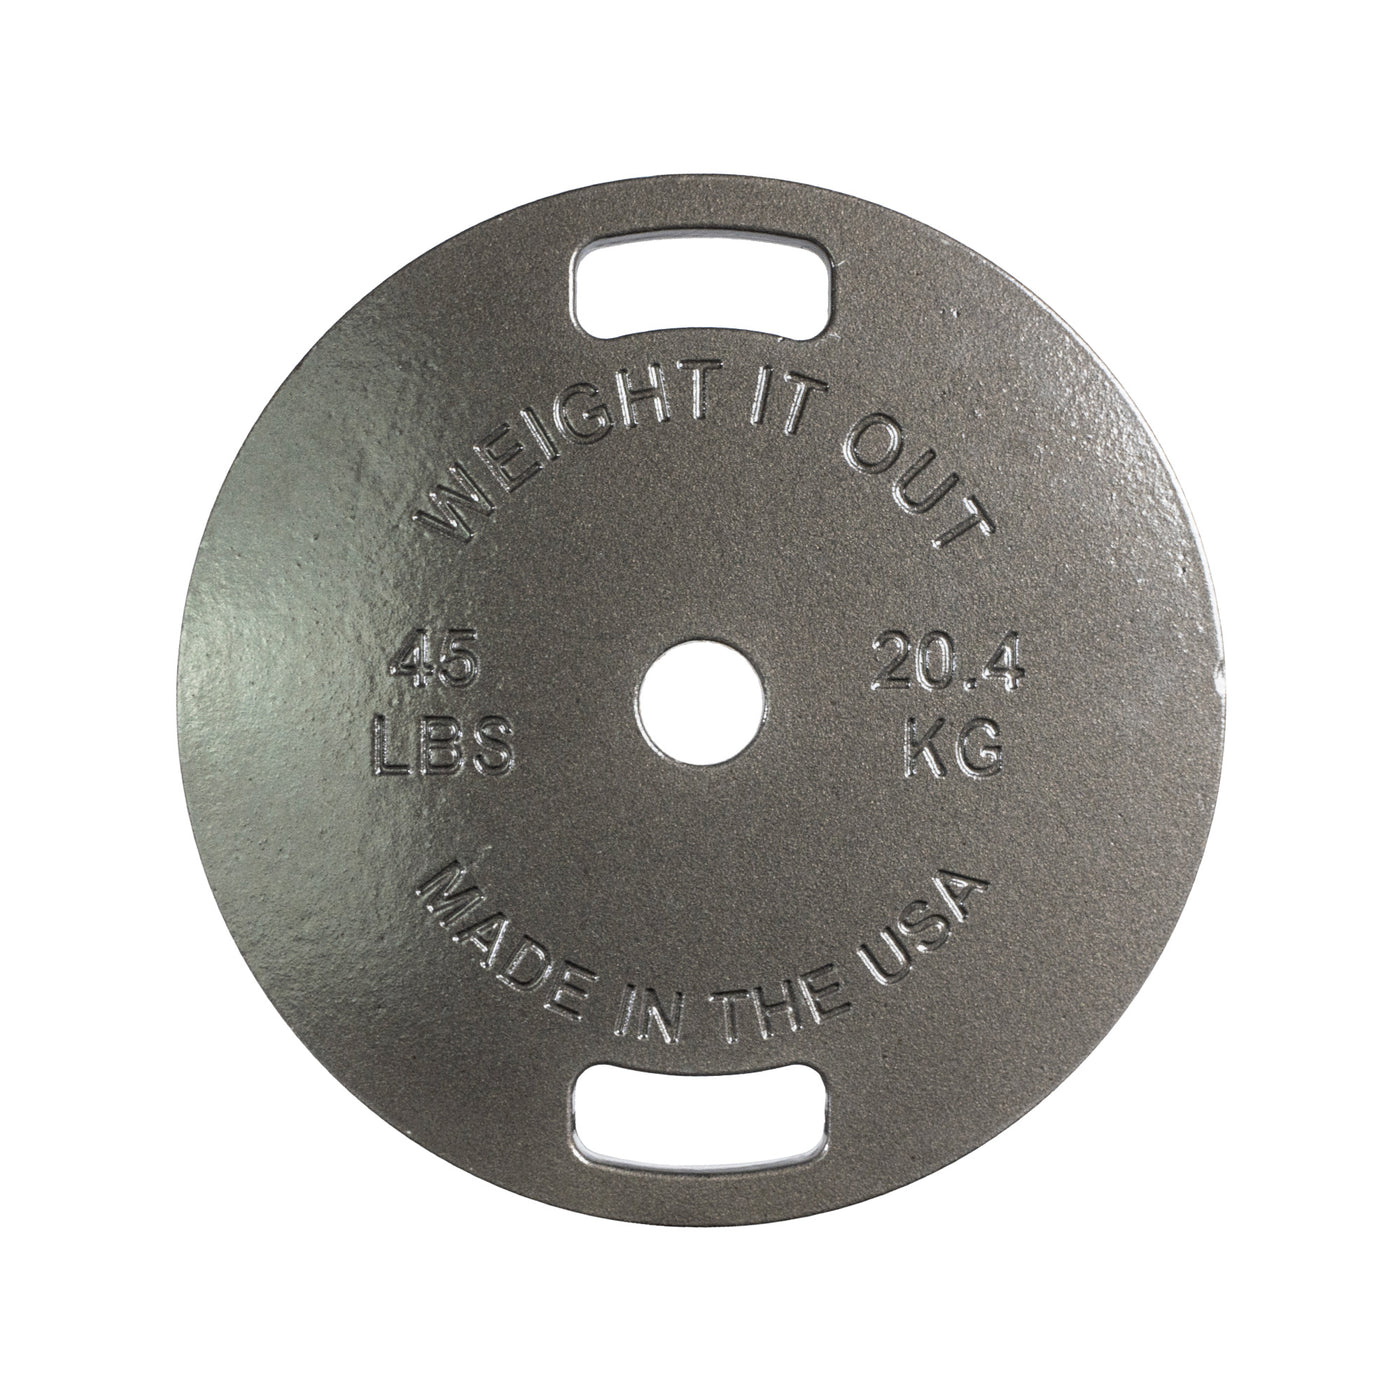 45 LBs Machined Cast Iron Weight Plate Pair (Free Shipping!)